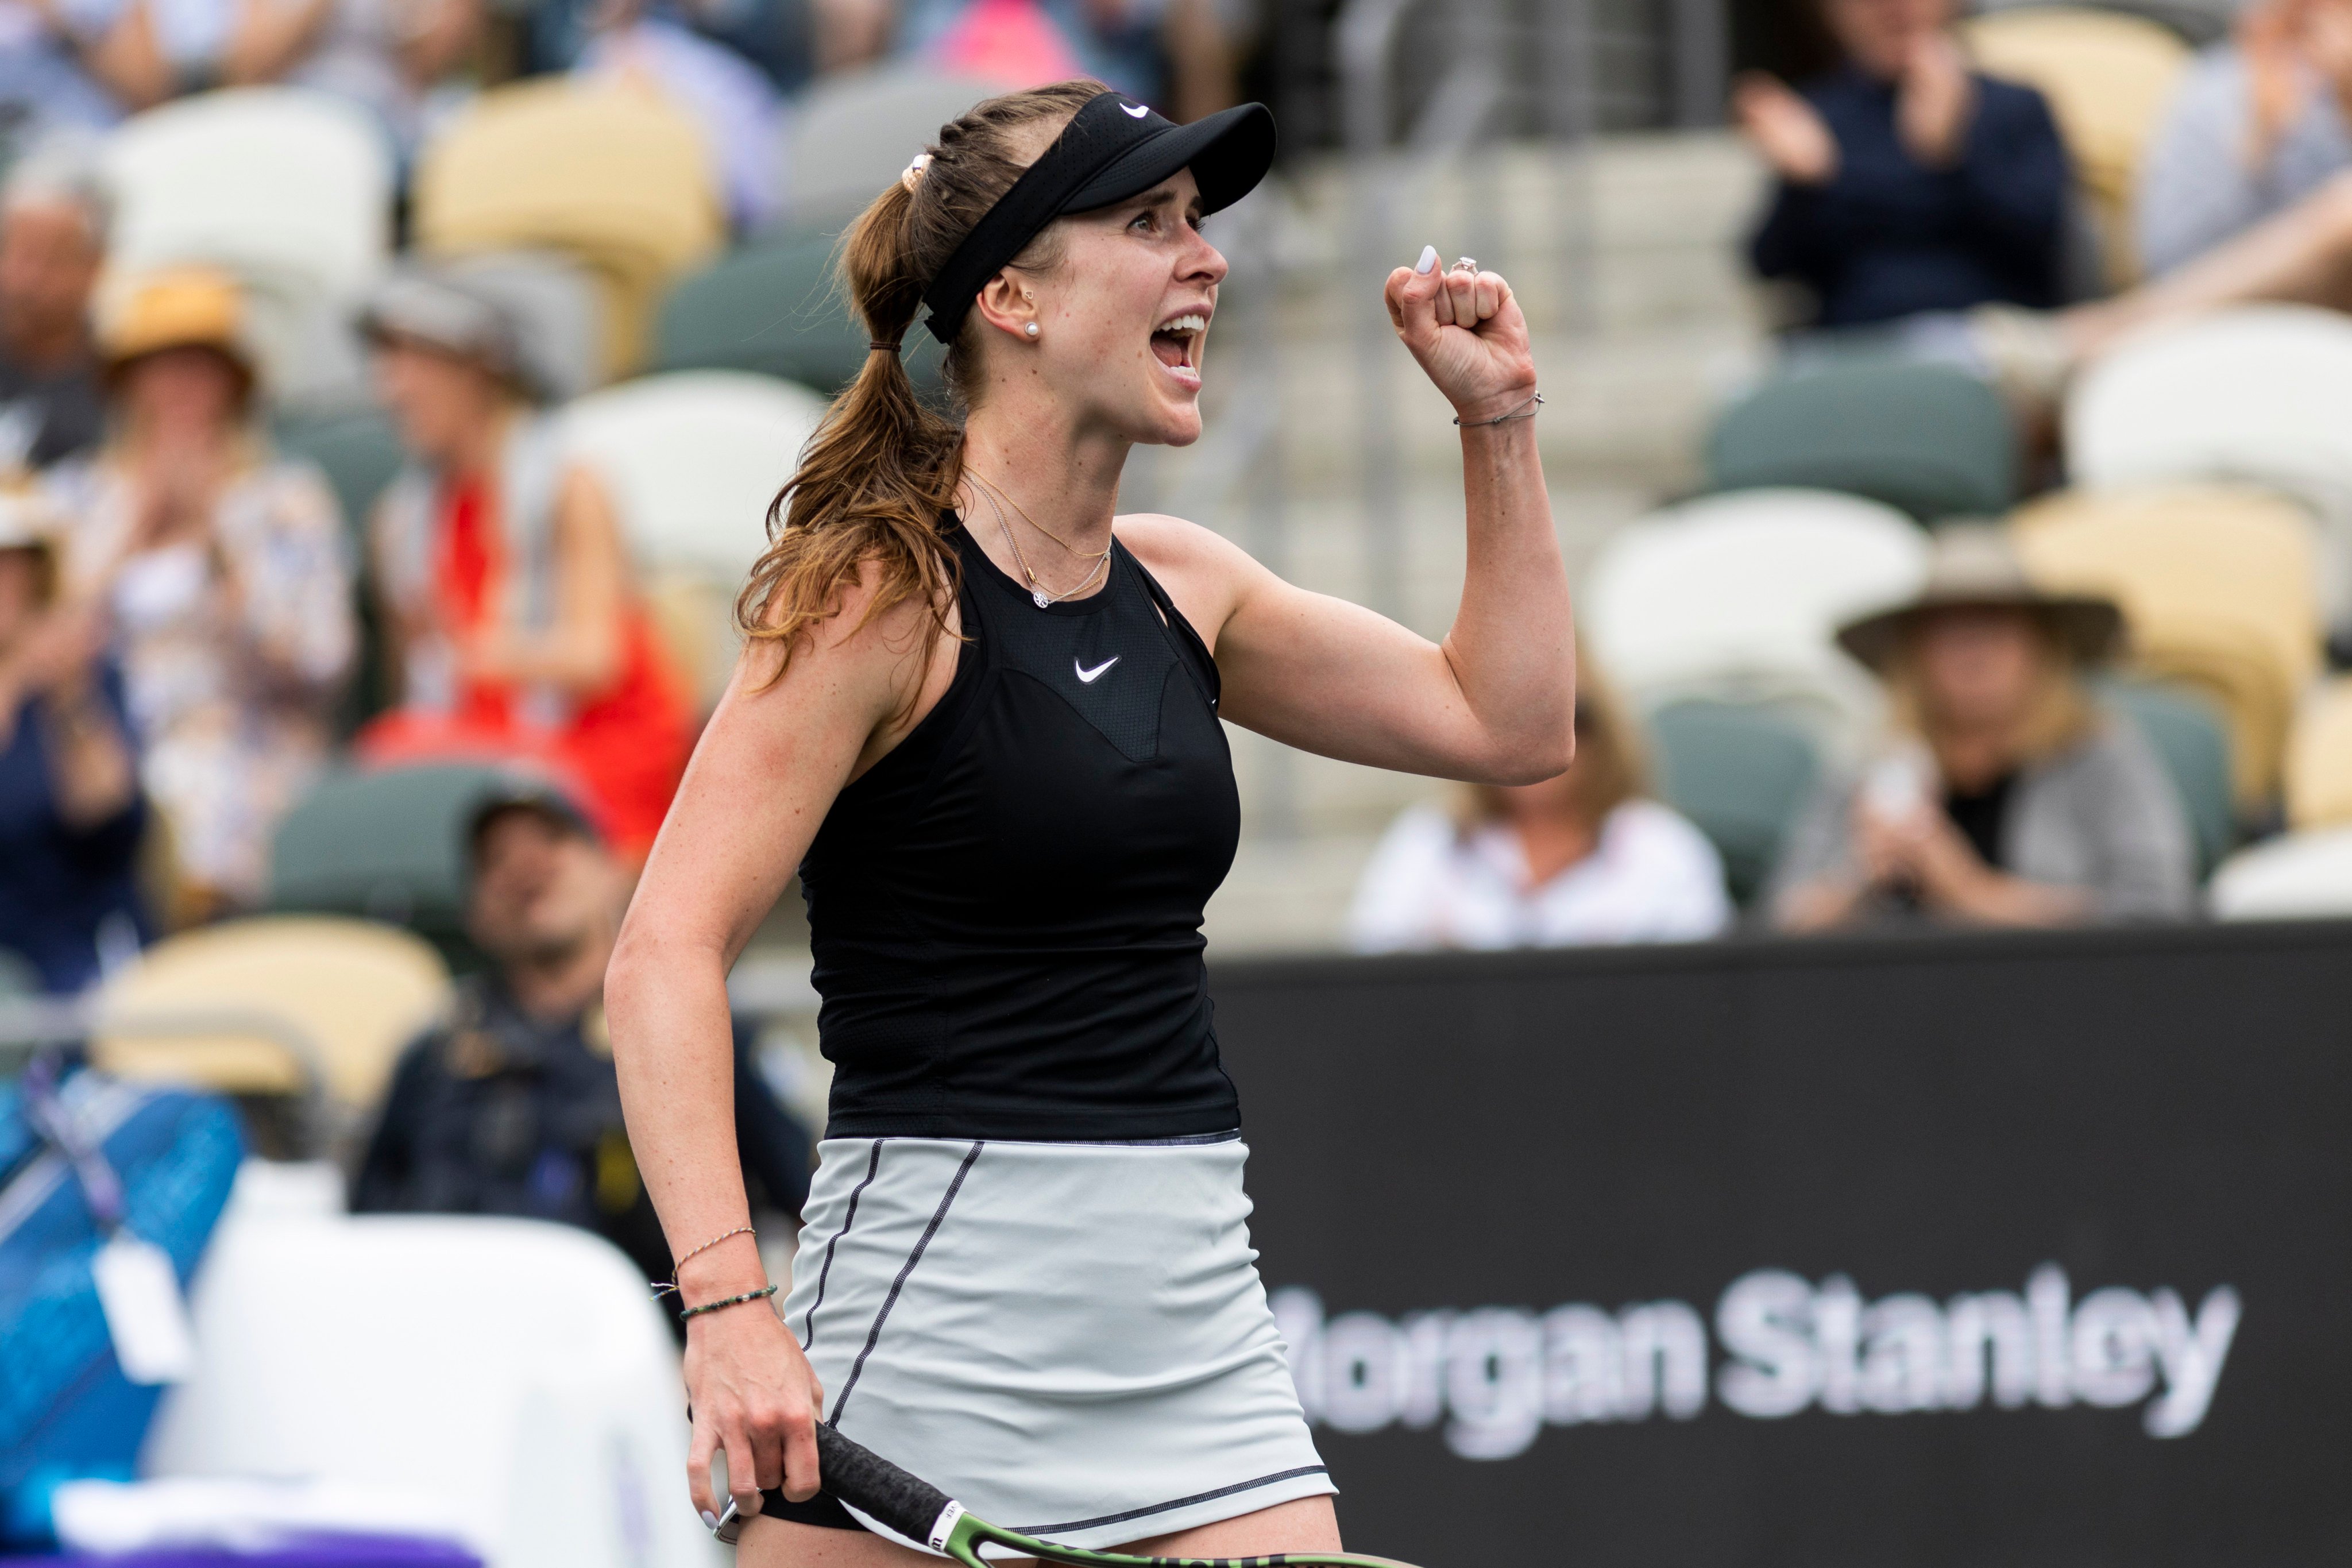 Elina Svitolina plays her first WTA match after more than a year out to have a baby, losing to Yulia Putintseva at the Charleston Open on Monday. Photo: AP